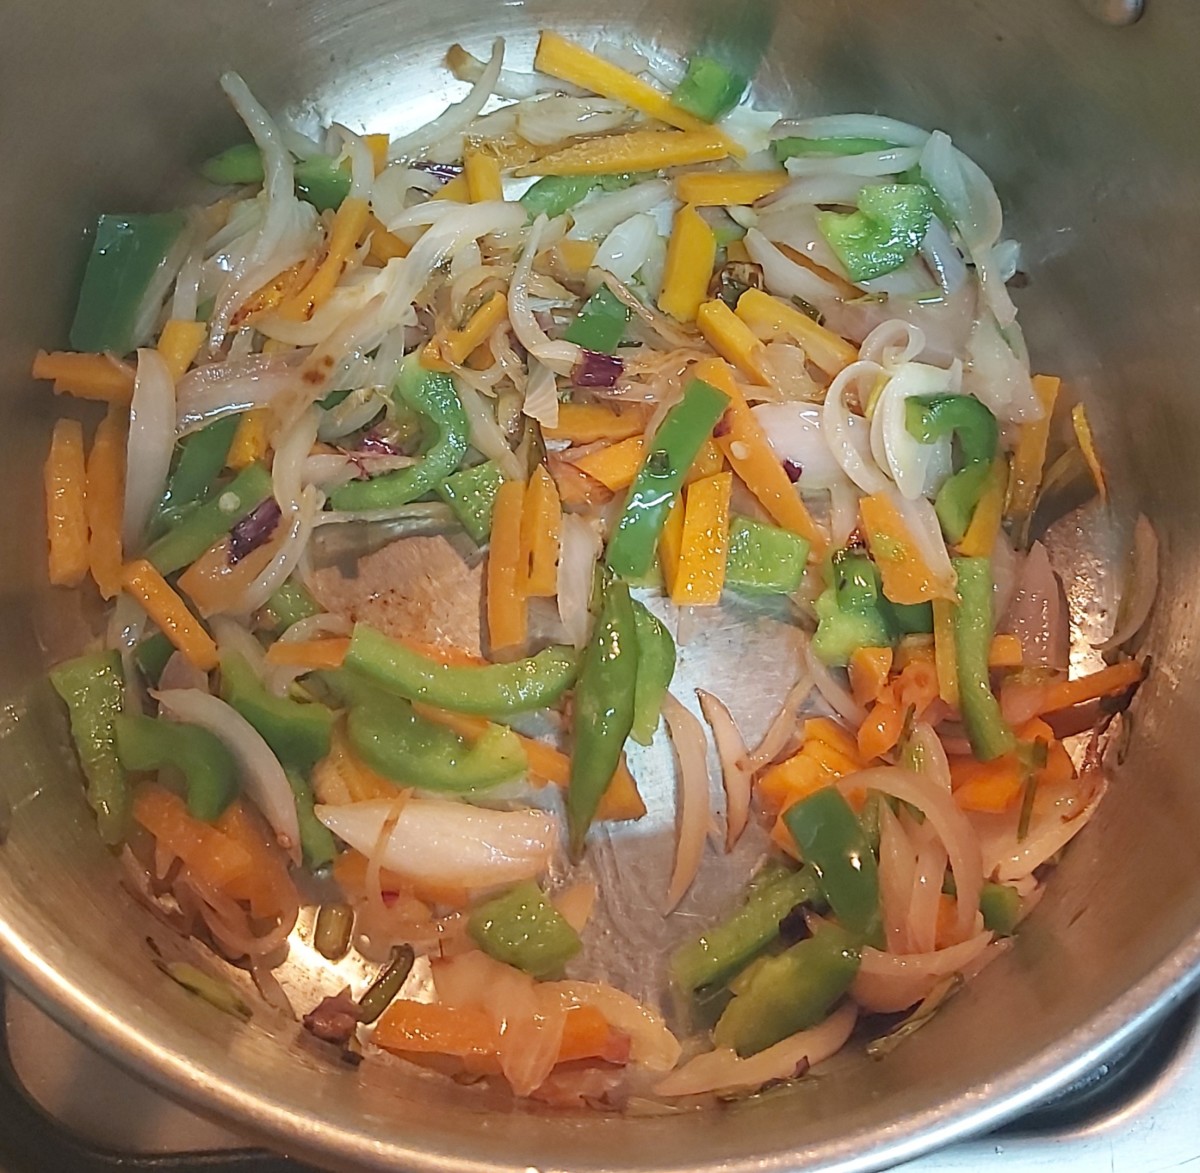 Add chopped carrot and capsicum. Fry for 1 minute over high flame. Do not overcook the vegetables. They should remain crunchy.